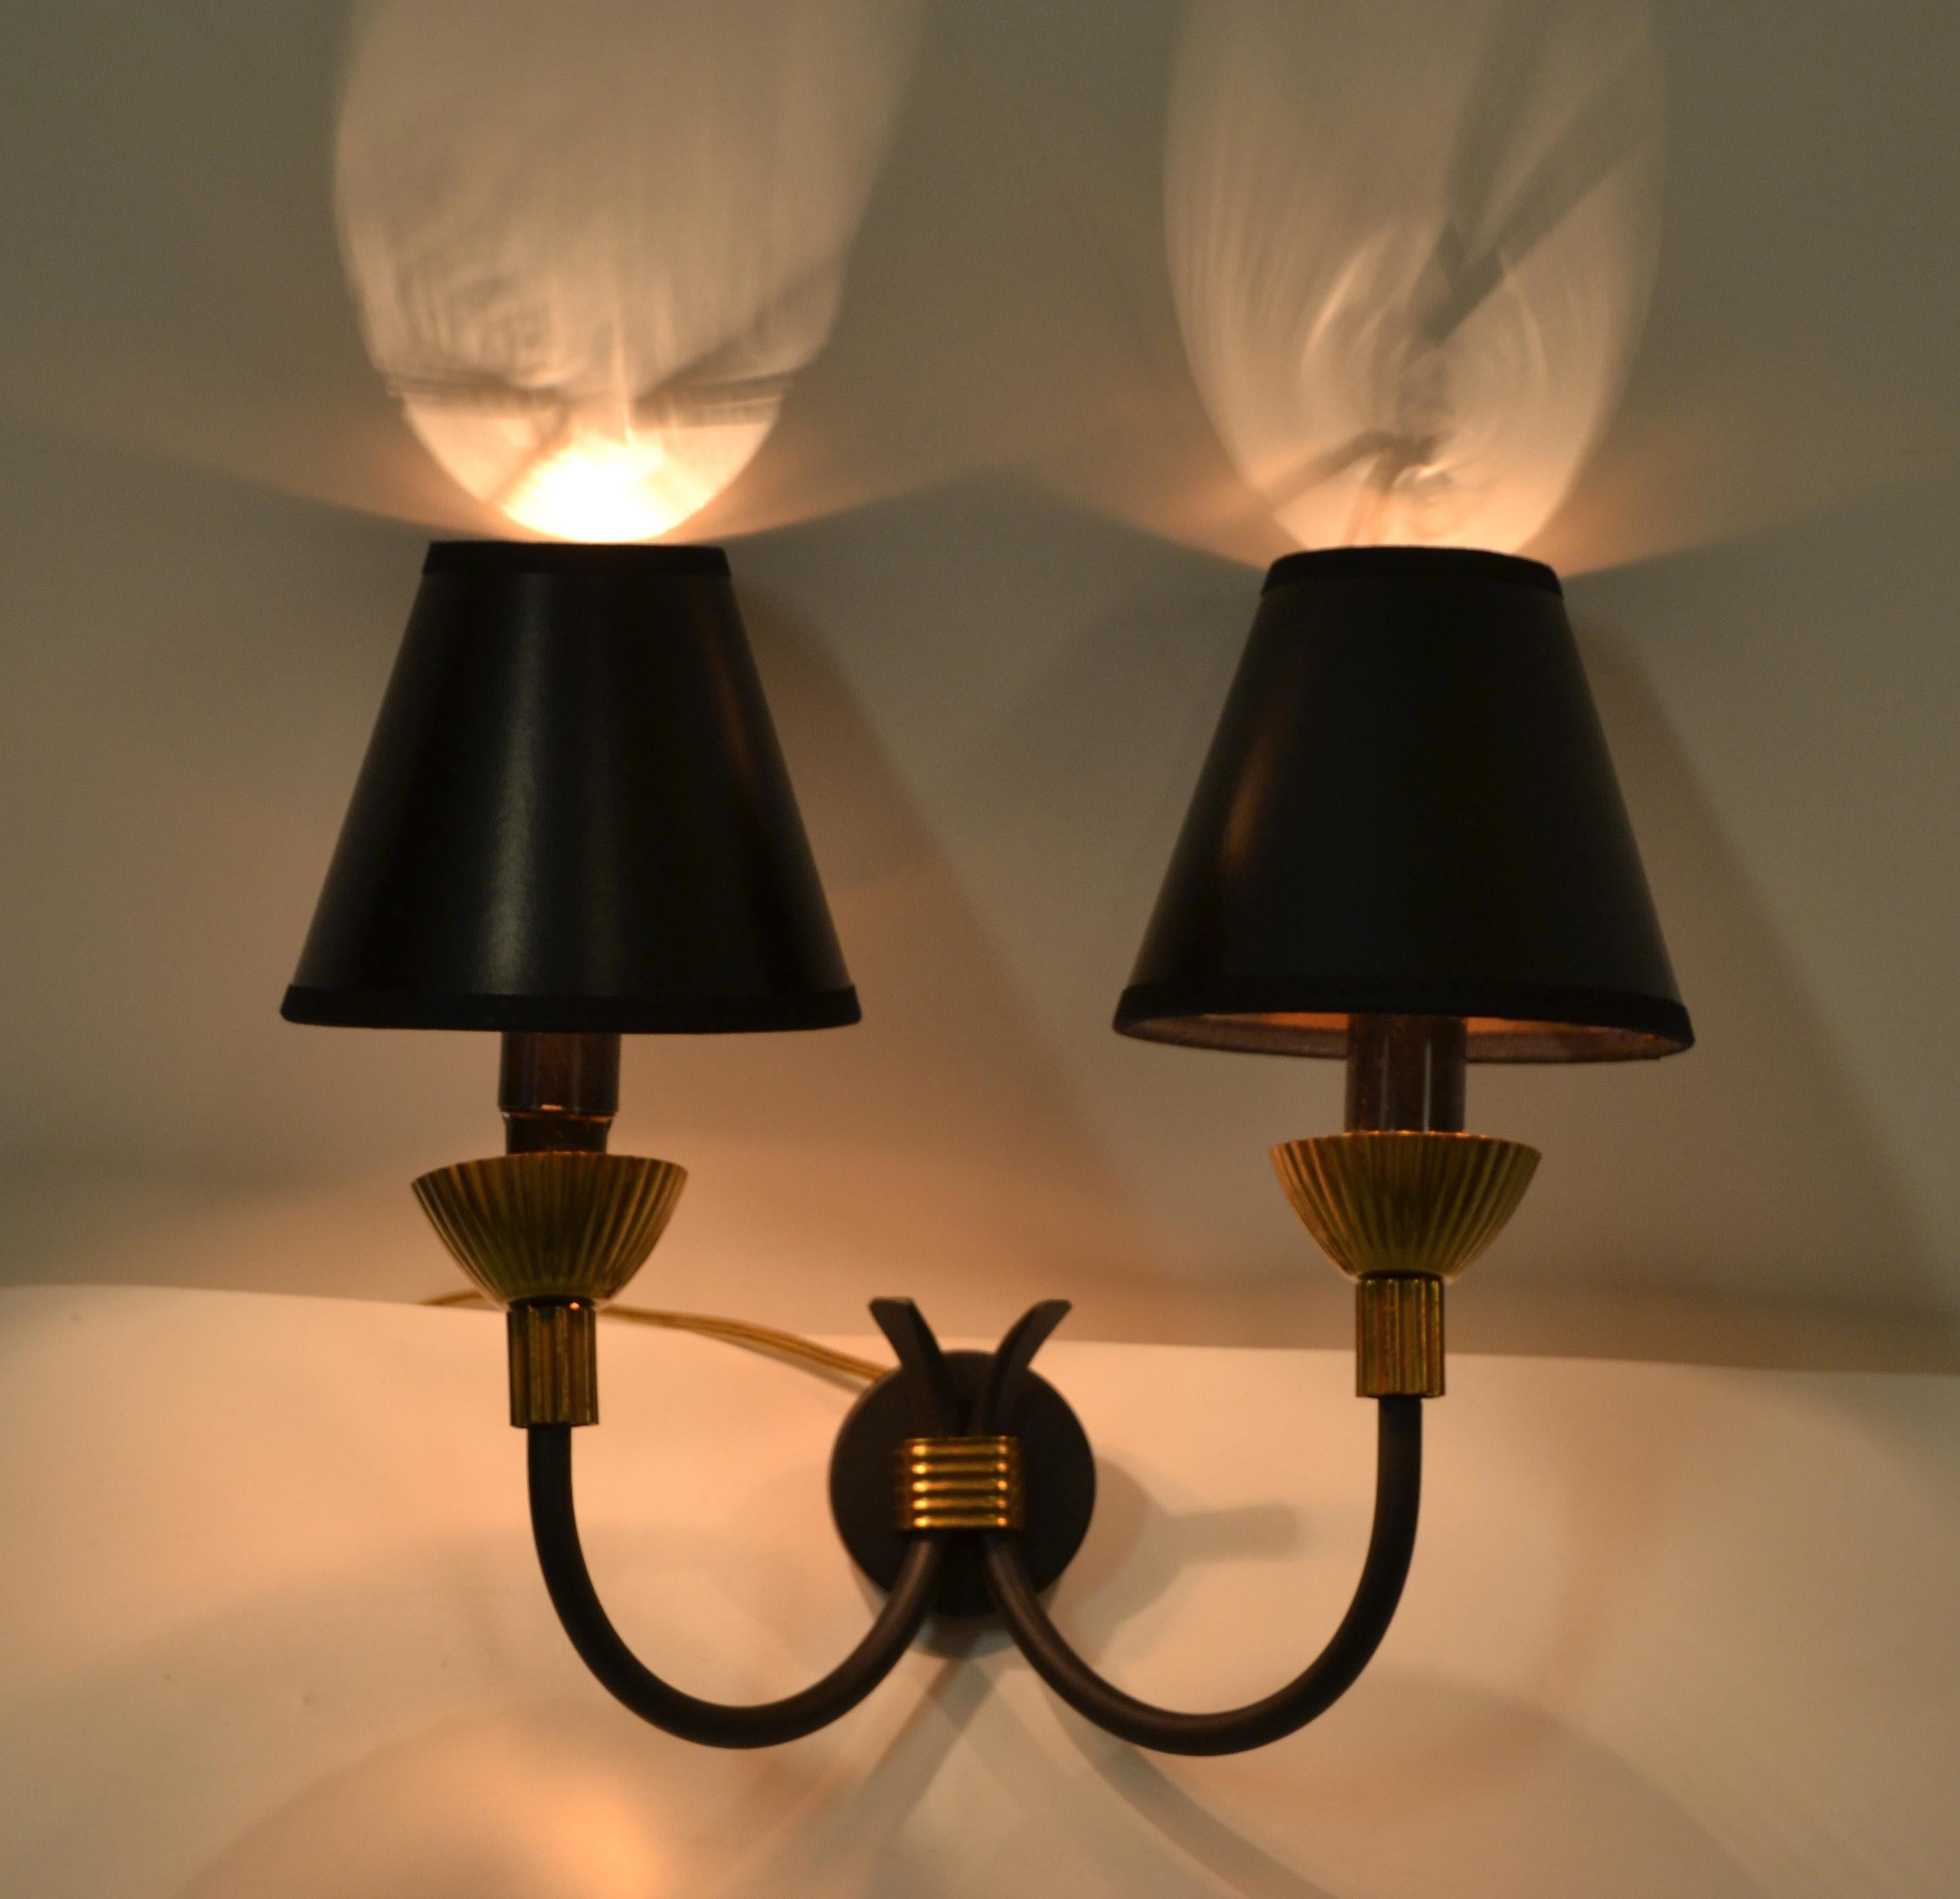 Maison Lunel Pair of Sconces Mid-Century Modern France, 2 pairs Available  1